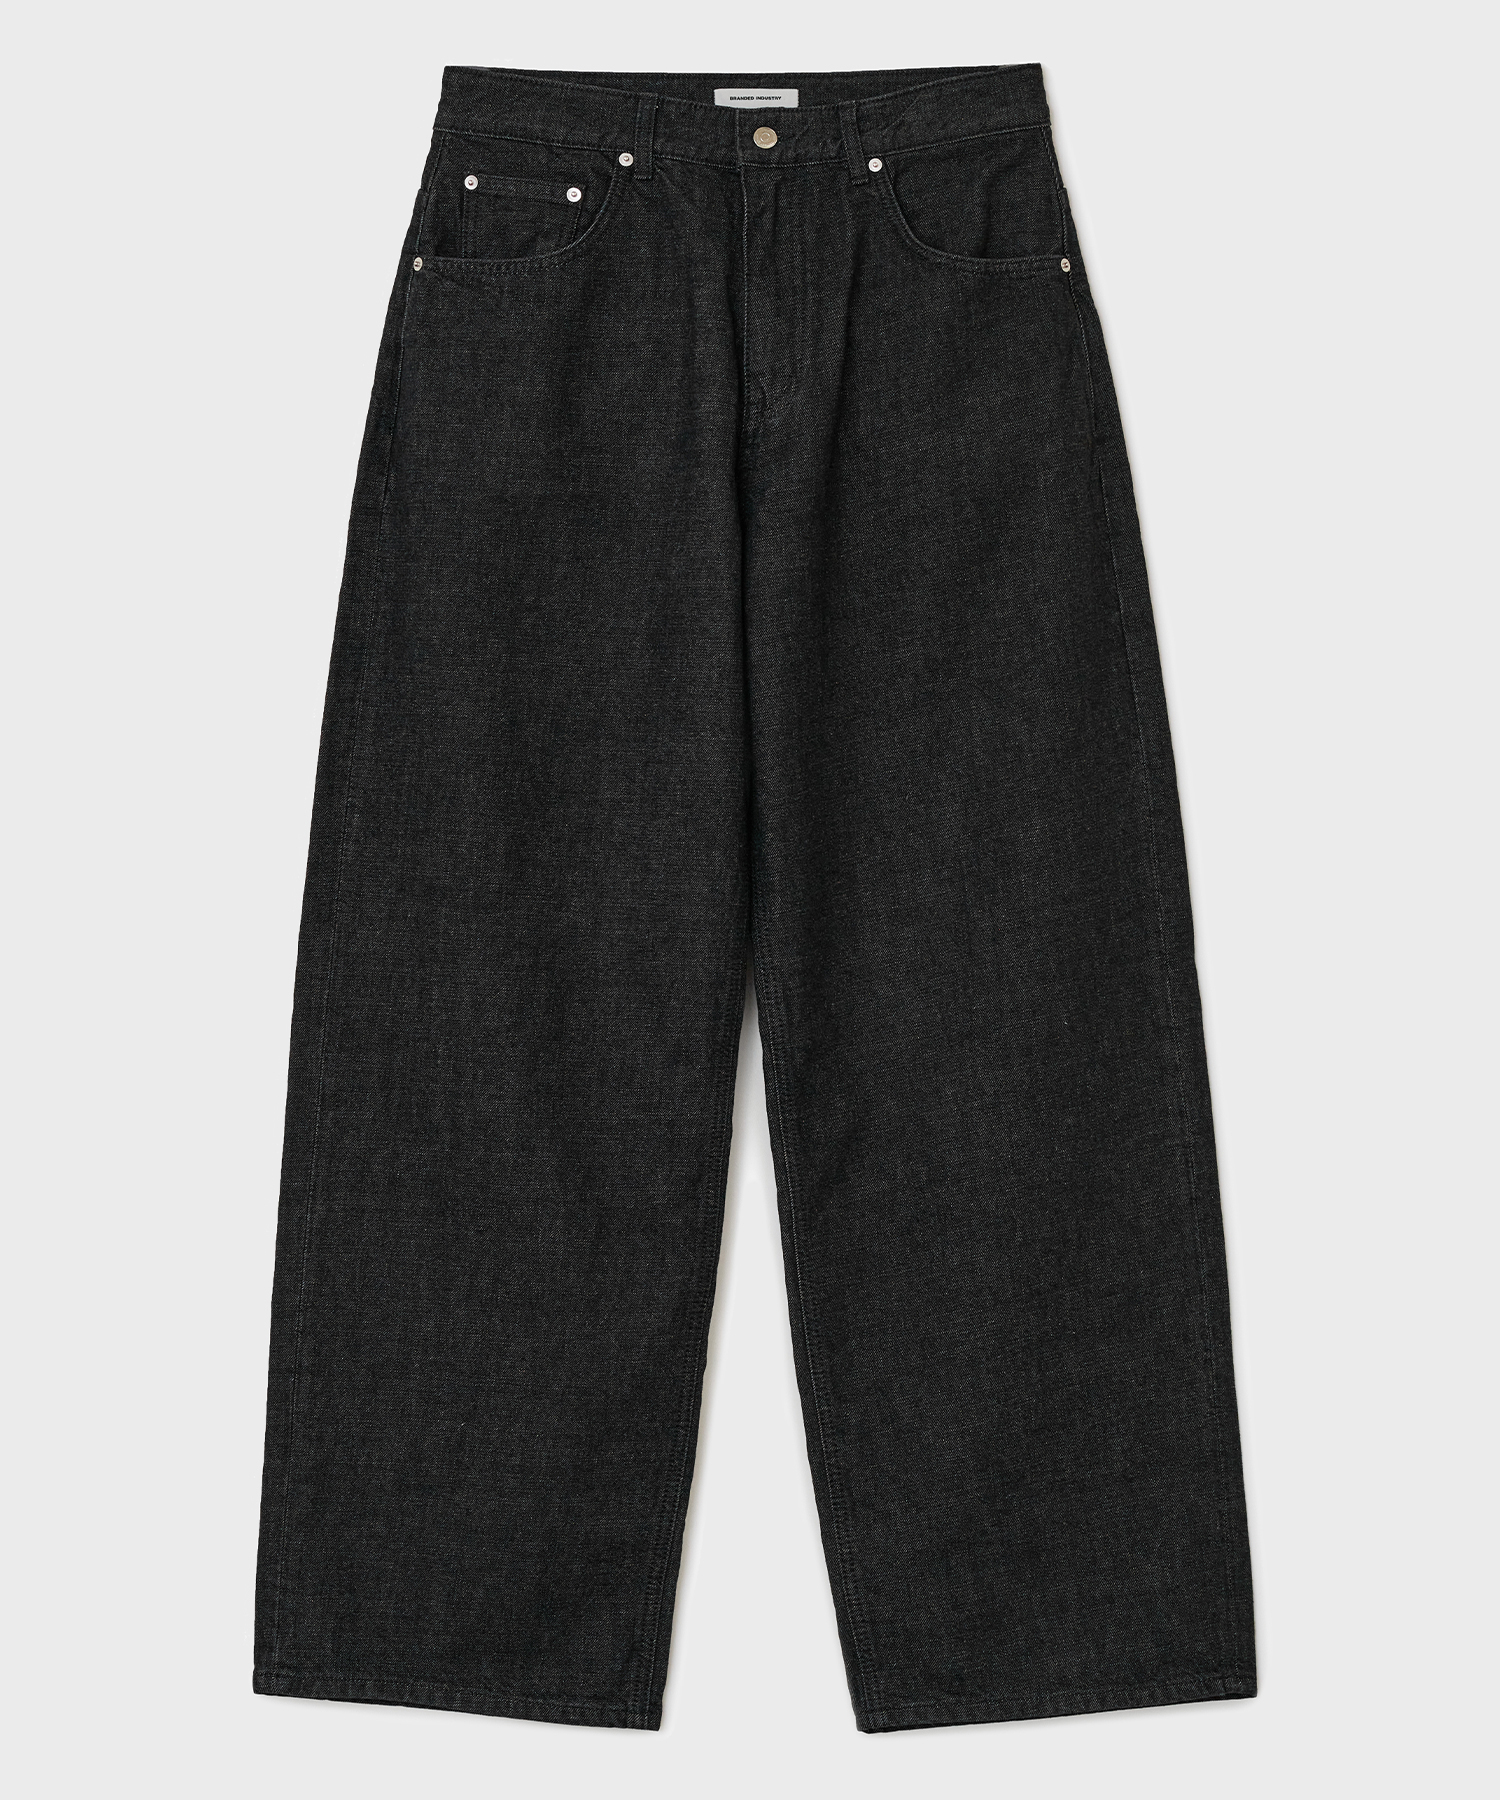 1706 SOLID BLACK JEANS [MAX WIDE STRAIGHT]